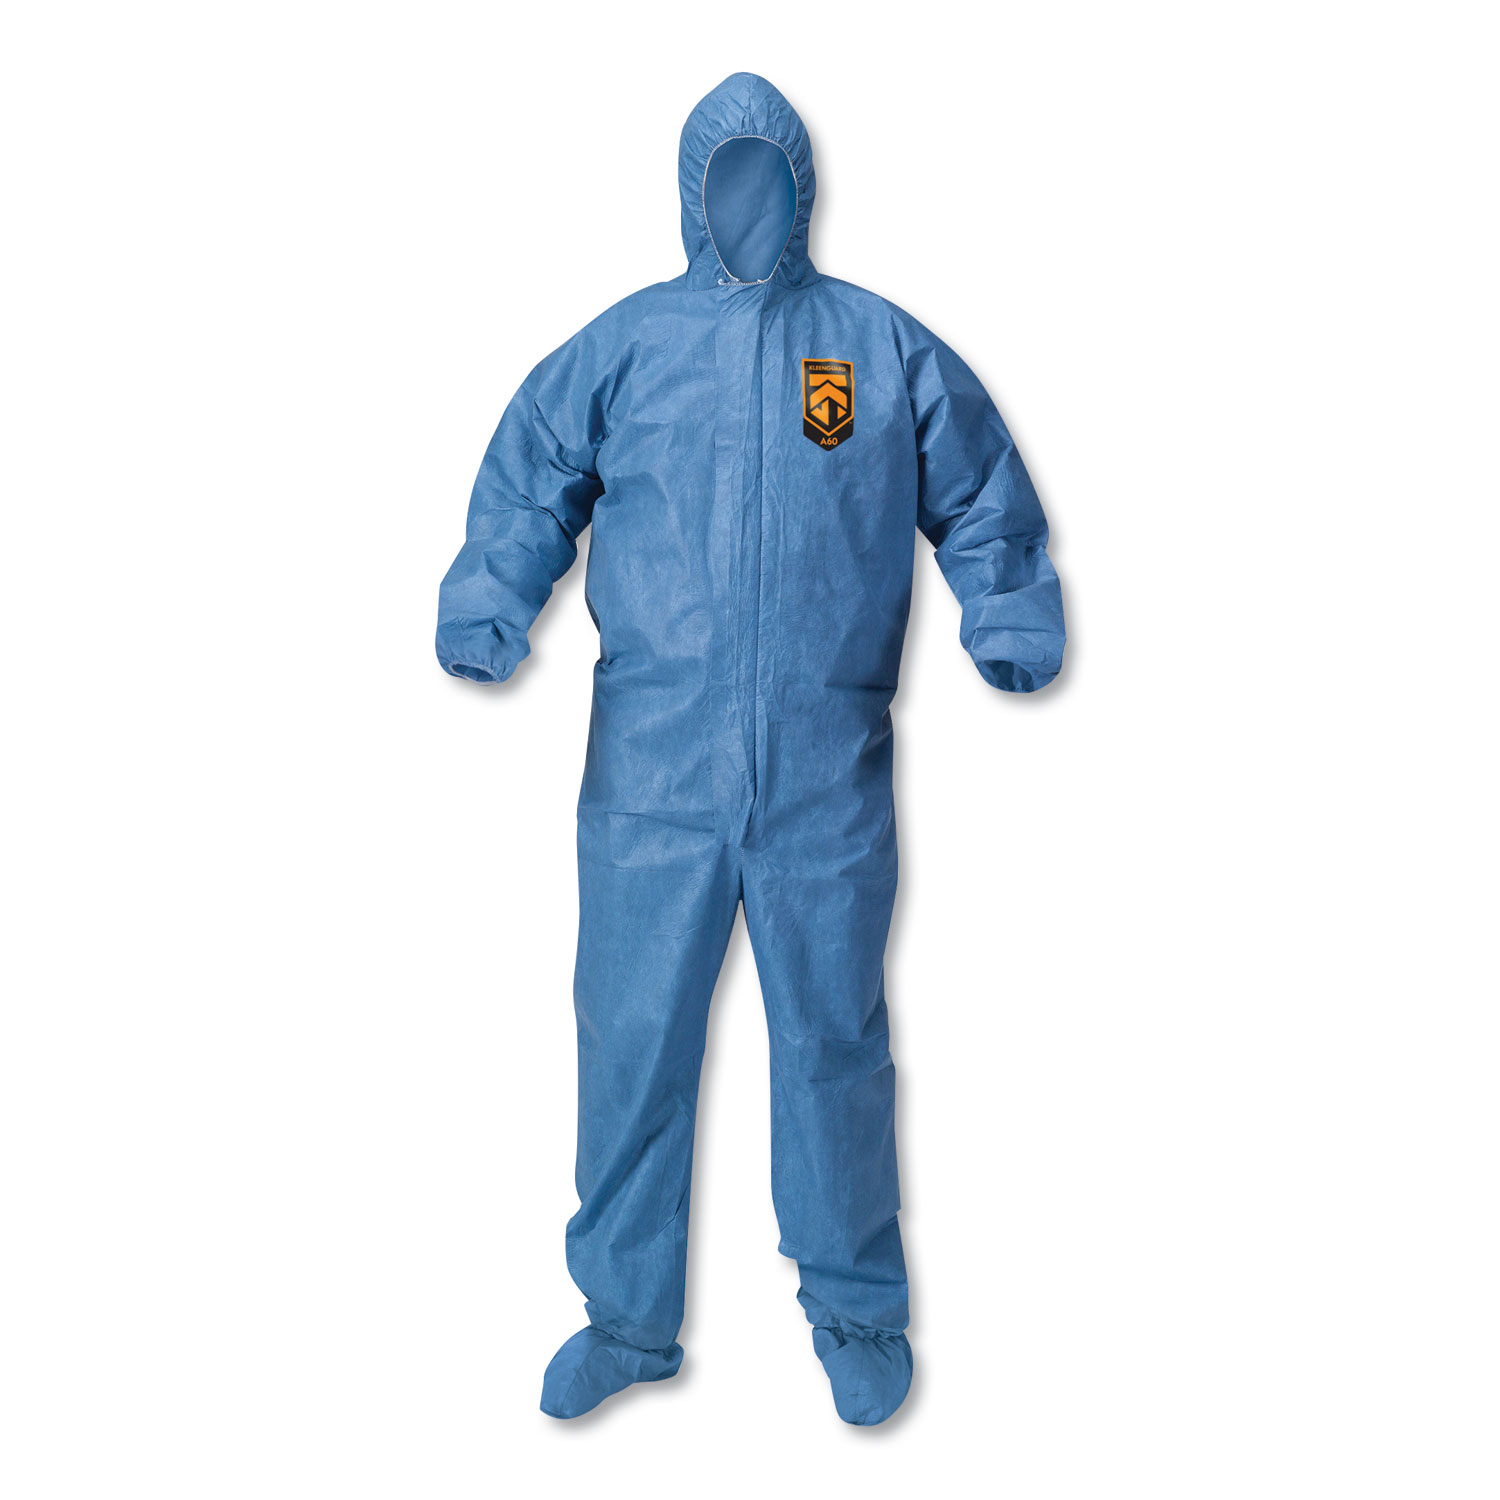  KleenGuard KCC 45095 A60 Blood and Chemical Splash Protection Coveralls, 2X-Large, Blue, 24/Carton (KCC45095) 